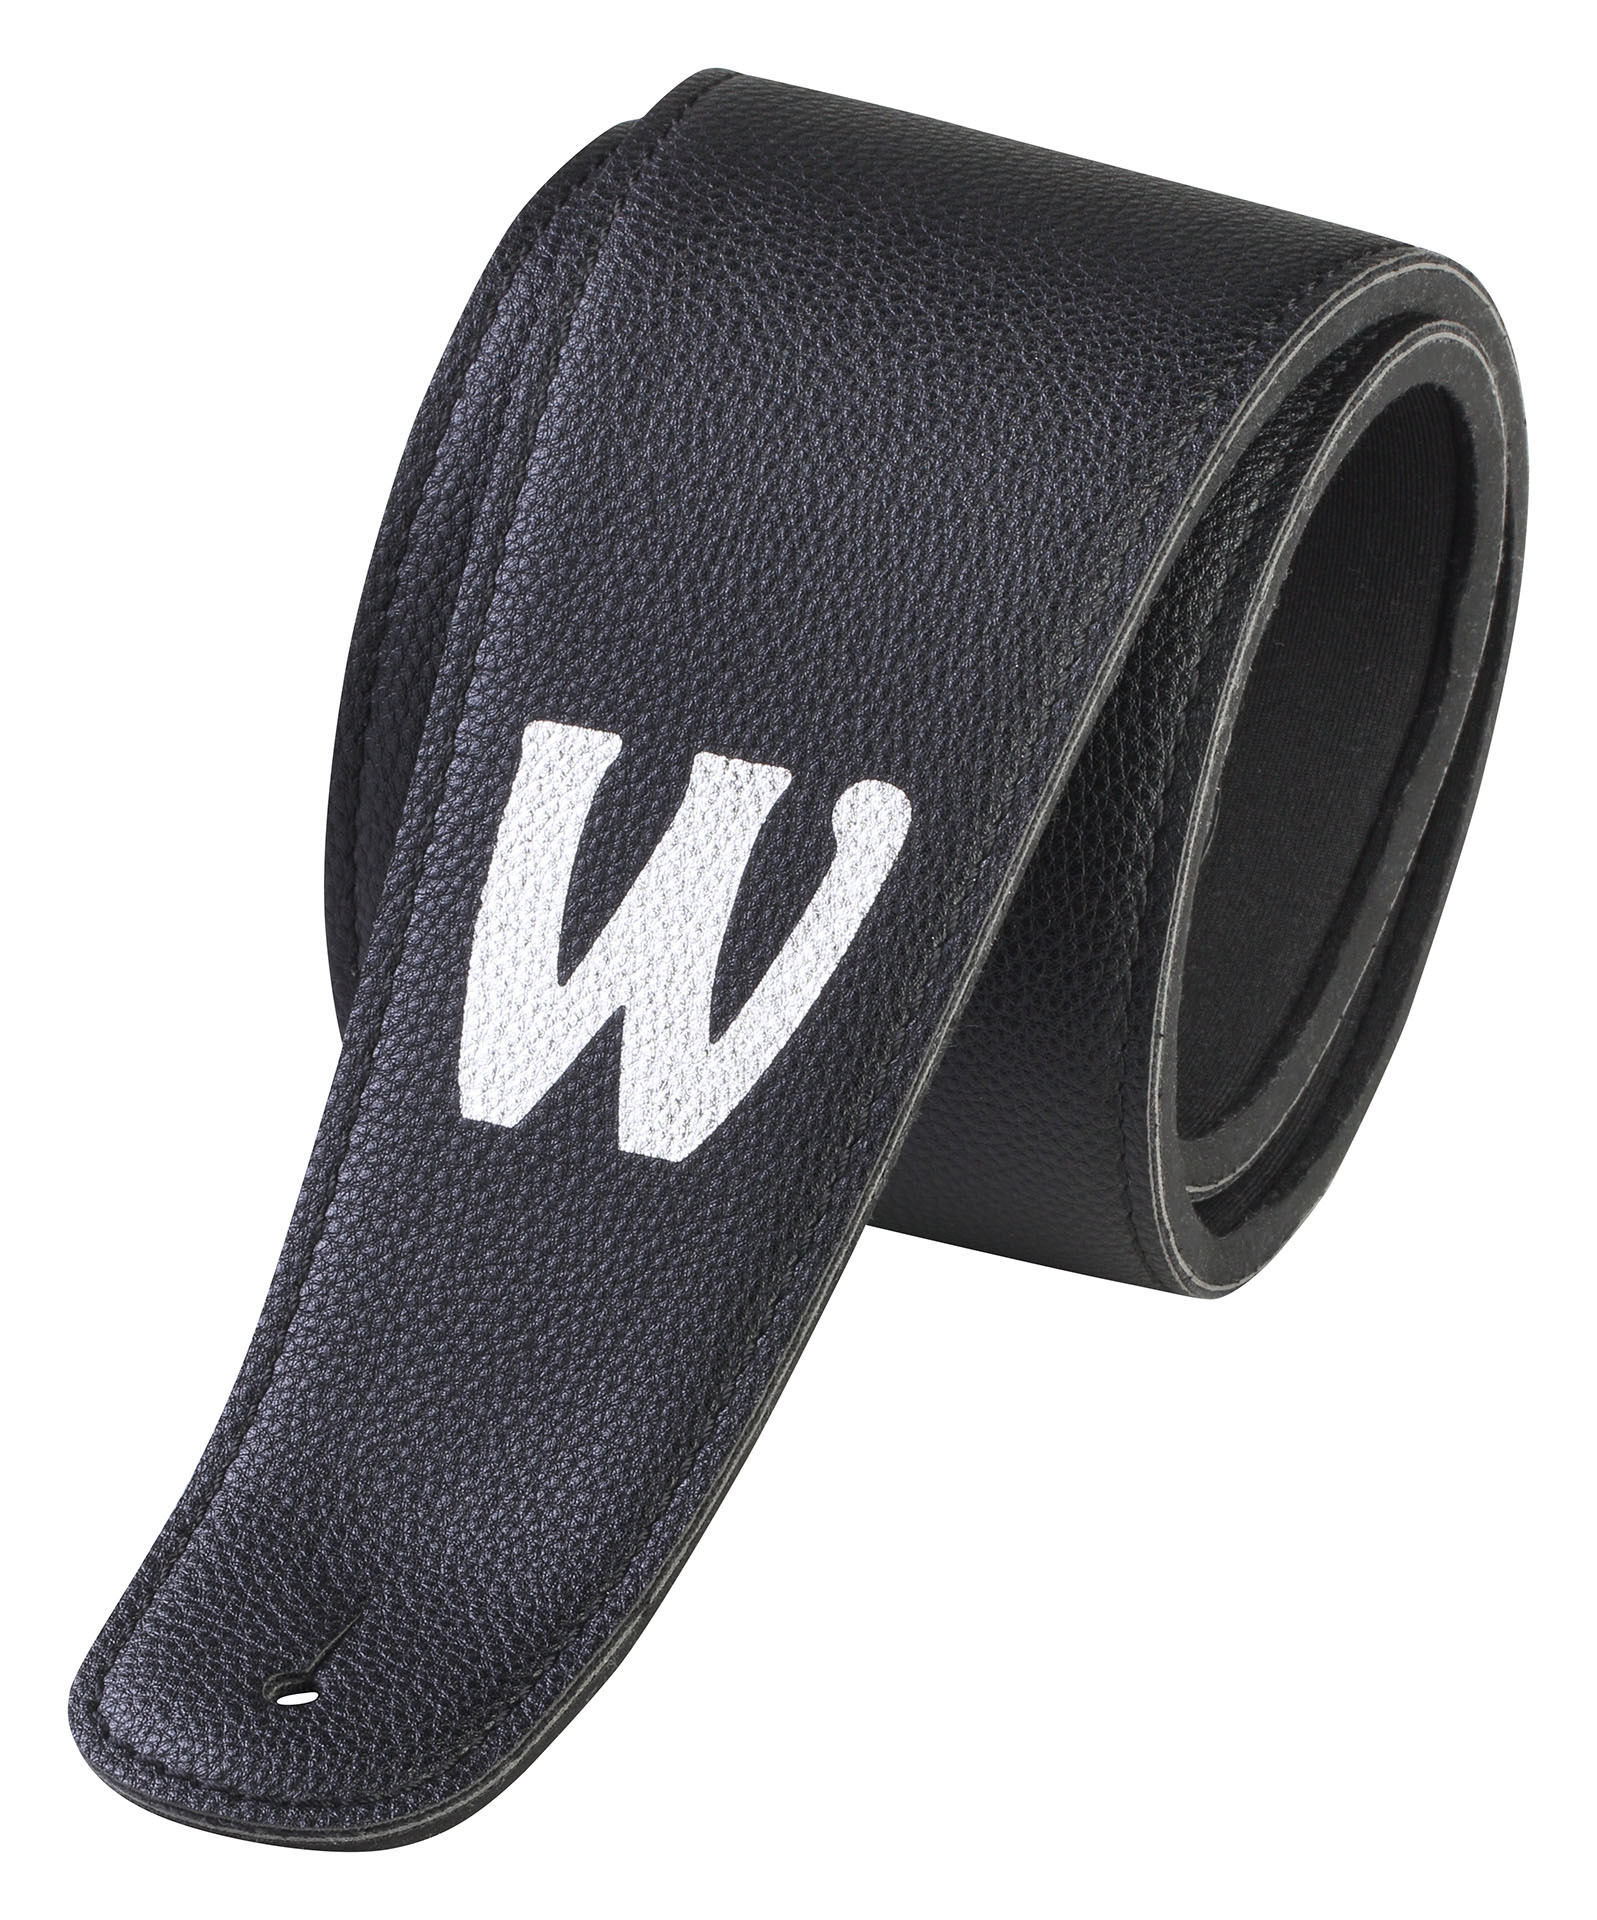 Warwick Synthetic Leather Bass Strap with Neoprene Padding - Black, Silver Embossing